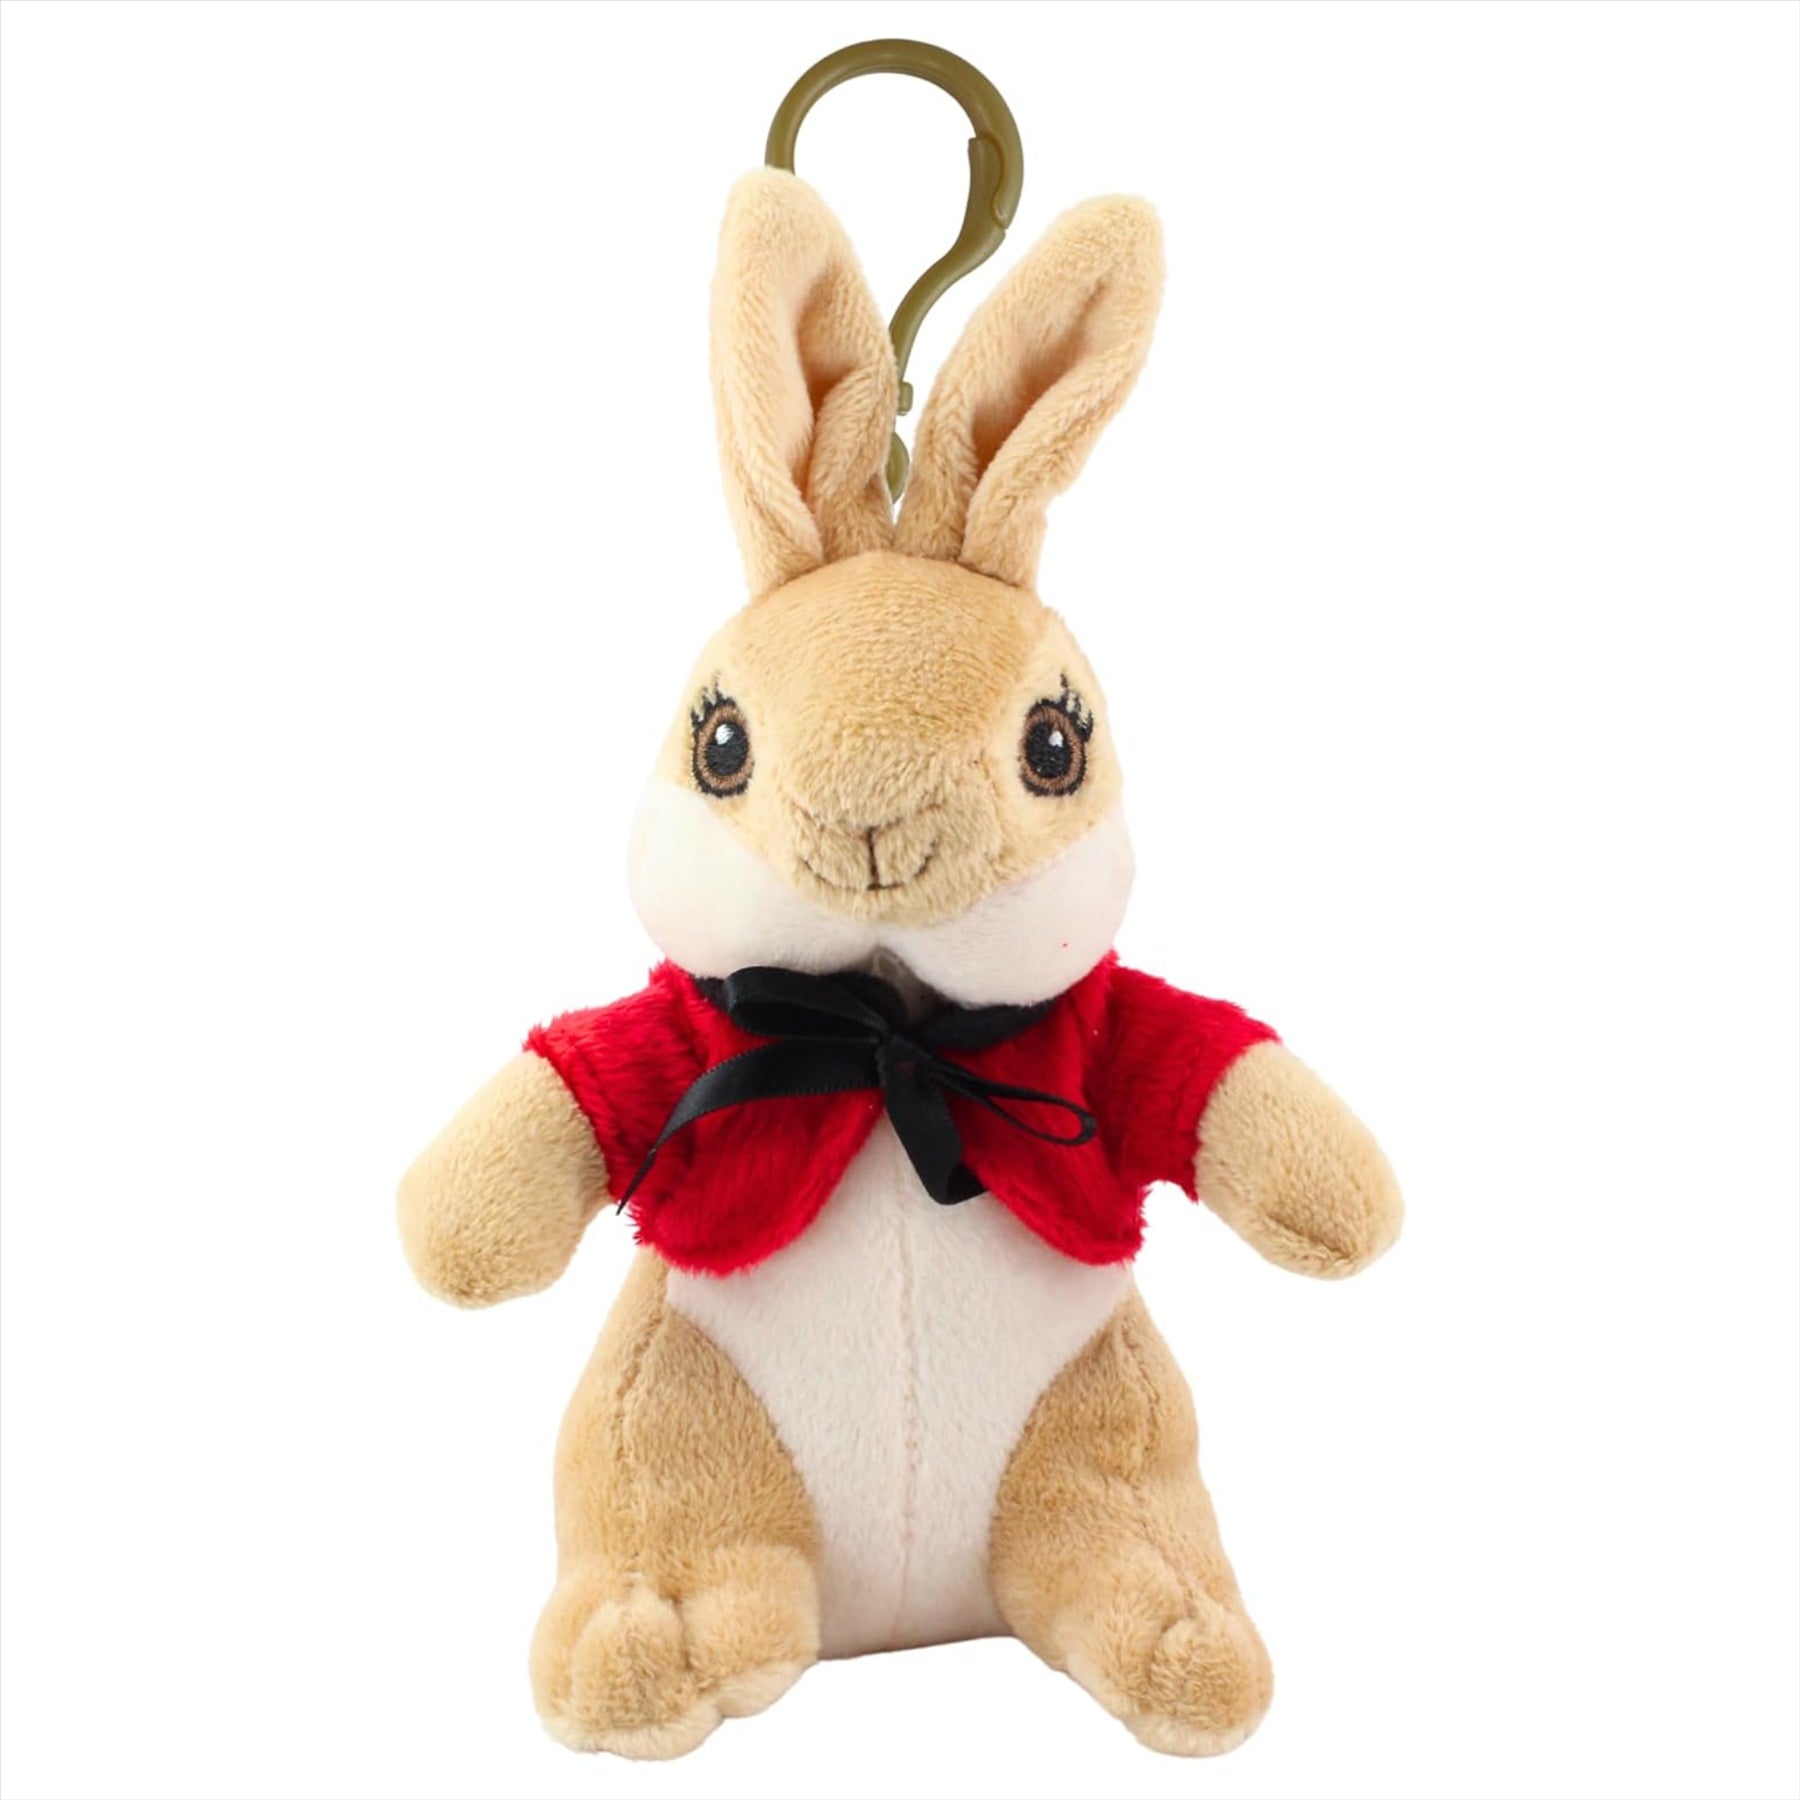 Peter Rabbit Super Soft Gift Quality 12cm Embroidered Plush Keyclips Set of All 3 - Peter Rabbit, Flopsy, and Benjamin - Toptoys2u